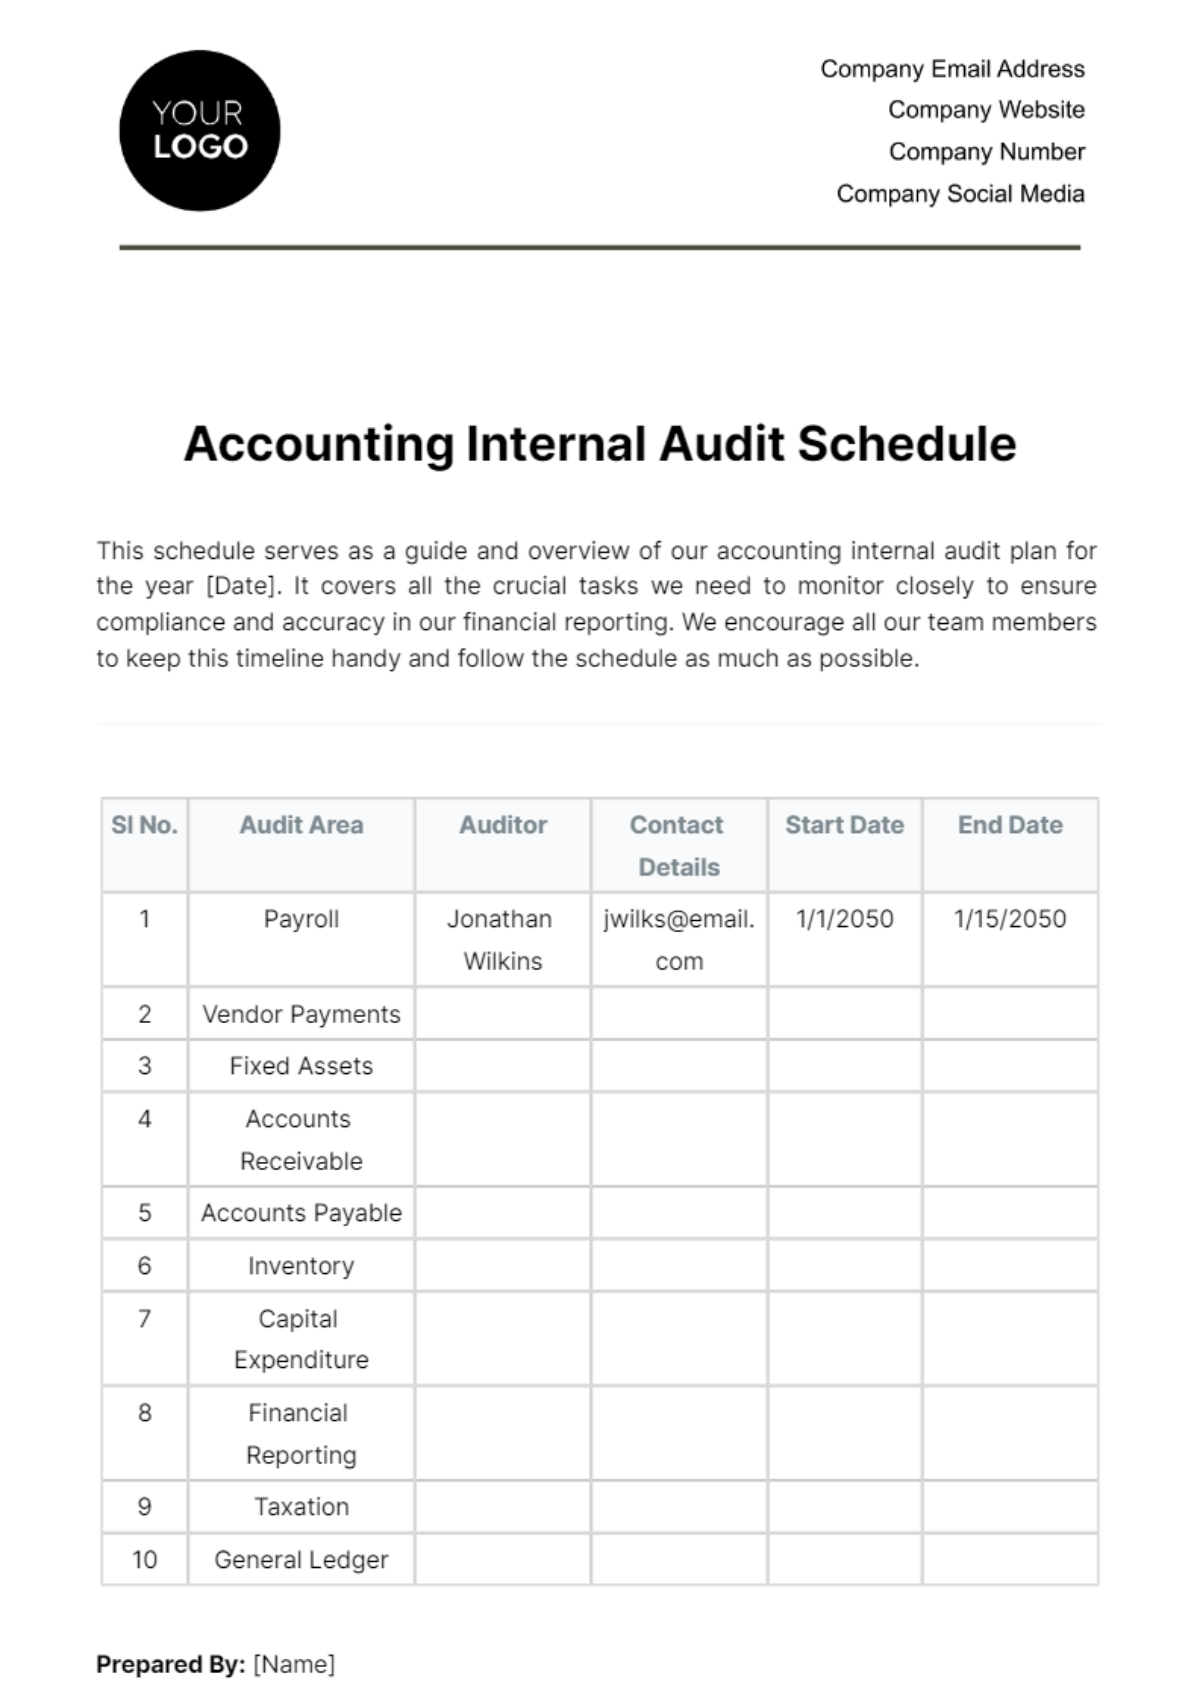 Accounting Internal Audit Schedule Template